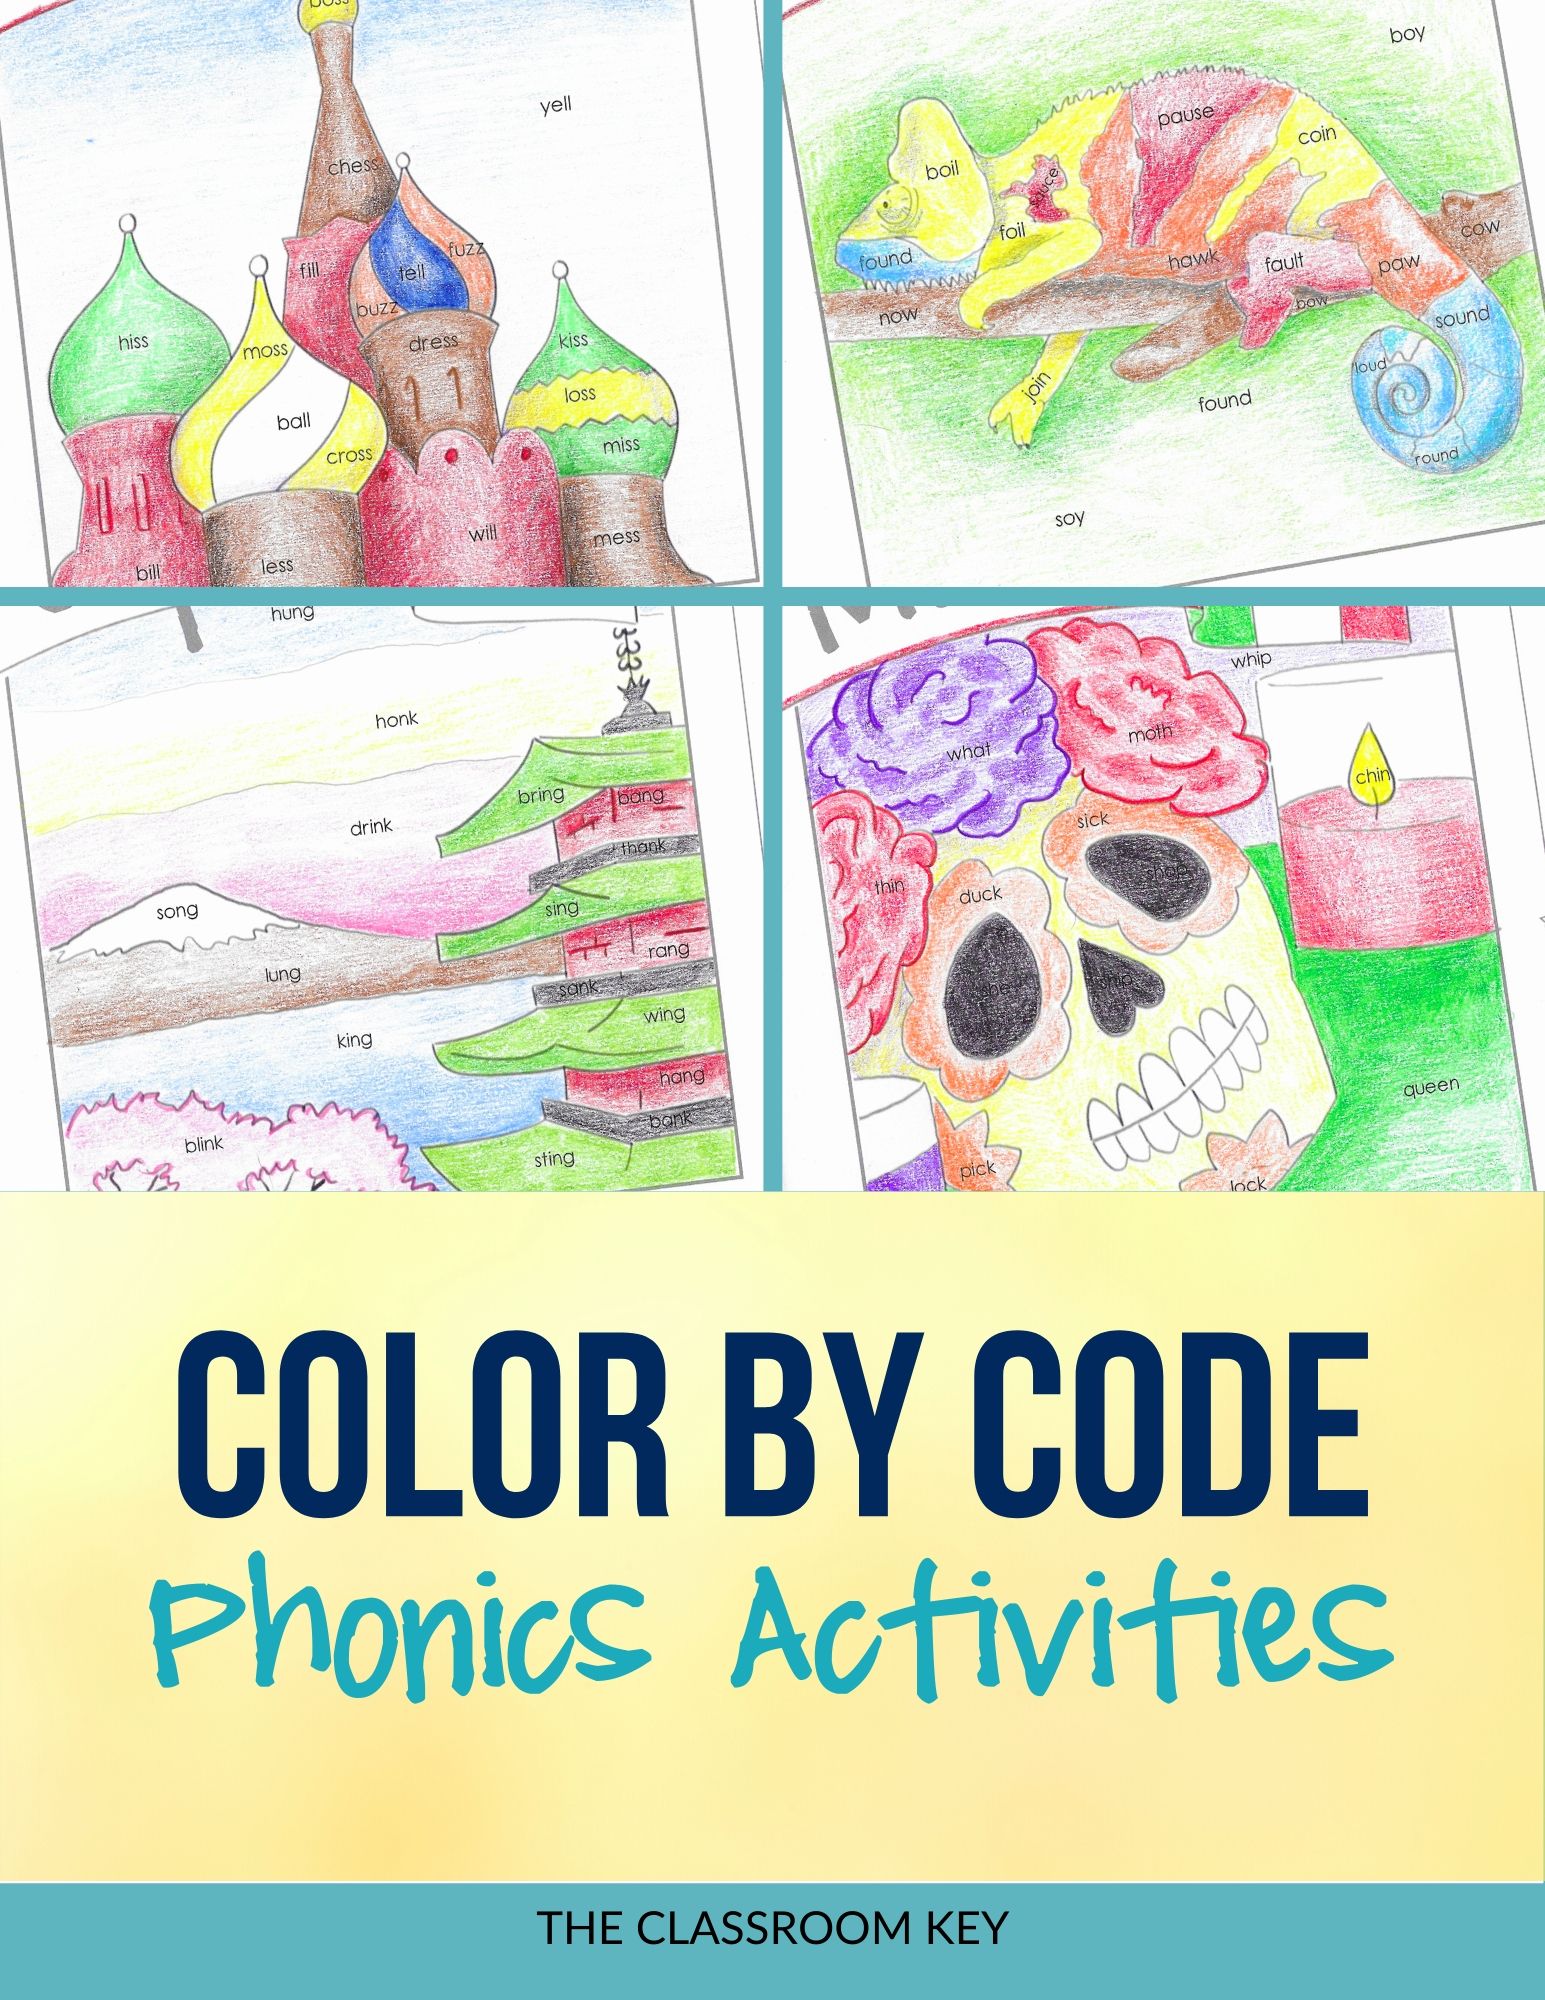 Engaging phonics practice activities for 1st or 2nd grade students. These color by code pages are fun for a literacy center or independent practice